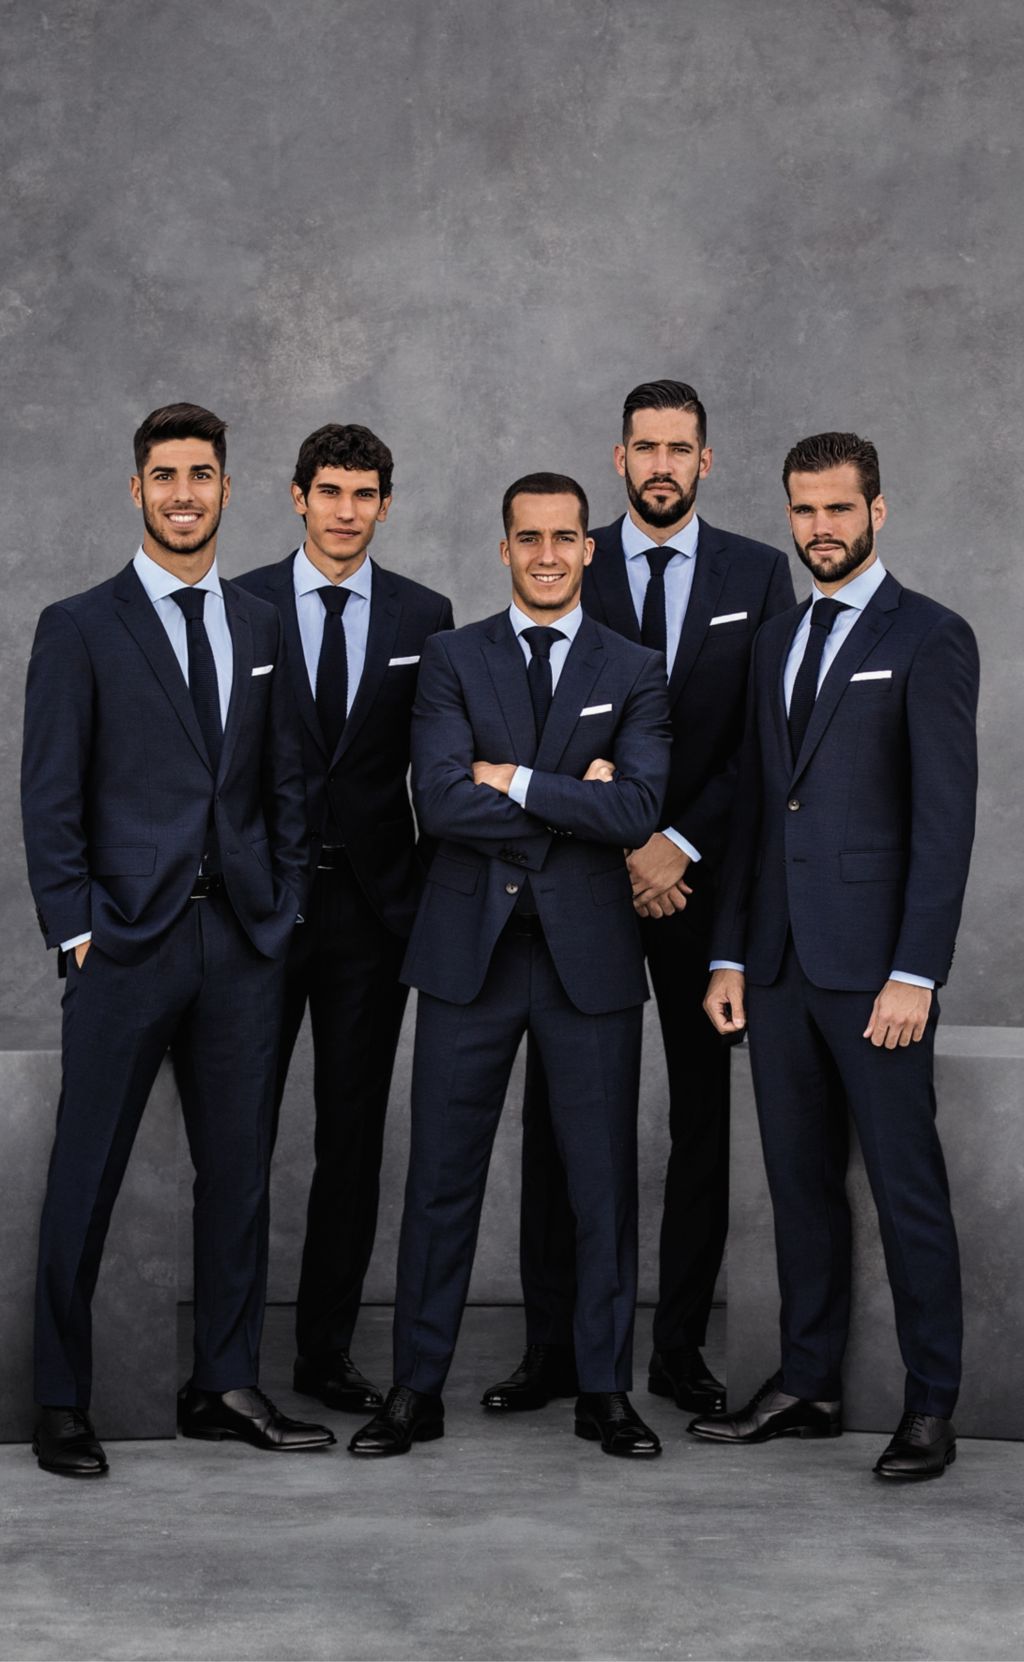 Real Madrid C. F. - Players wearing BOSS Suits & casual looks